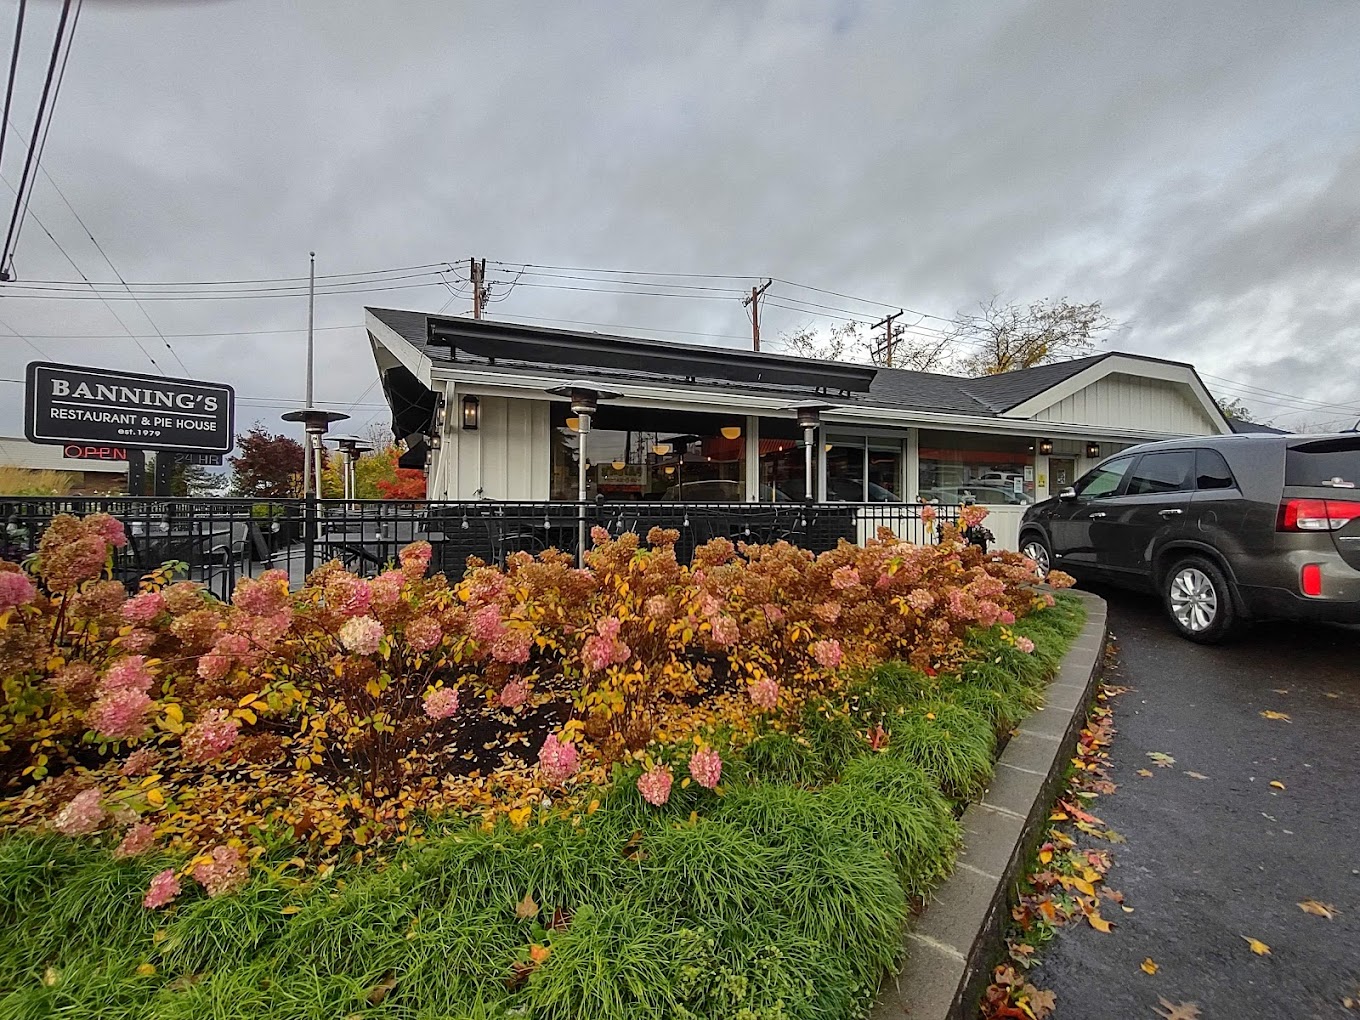 Locals Want To Keep This Charming Oregon Restaurant & Pie House A Secret